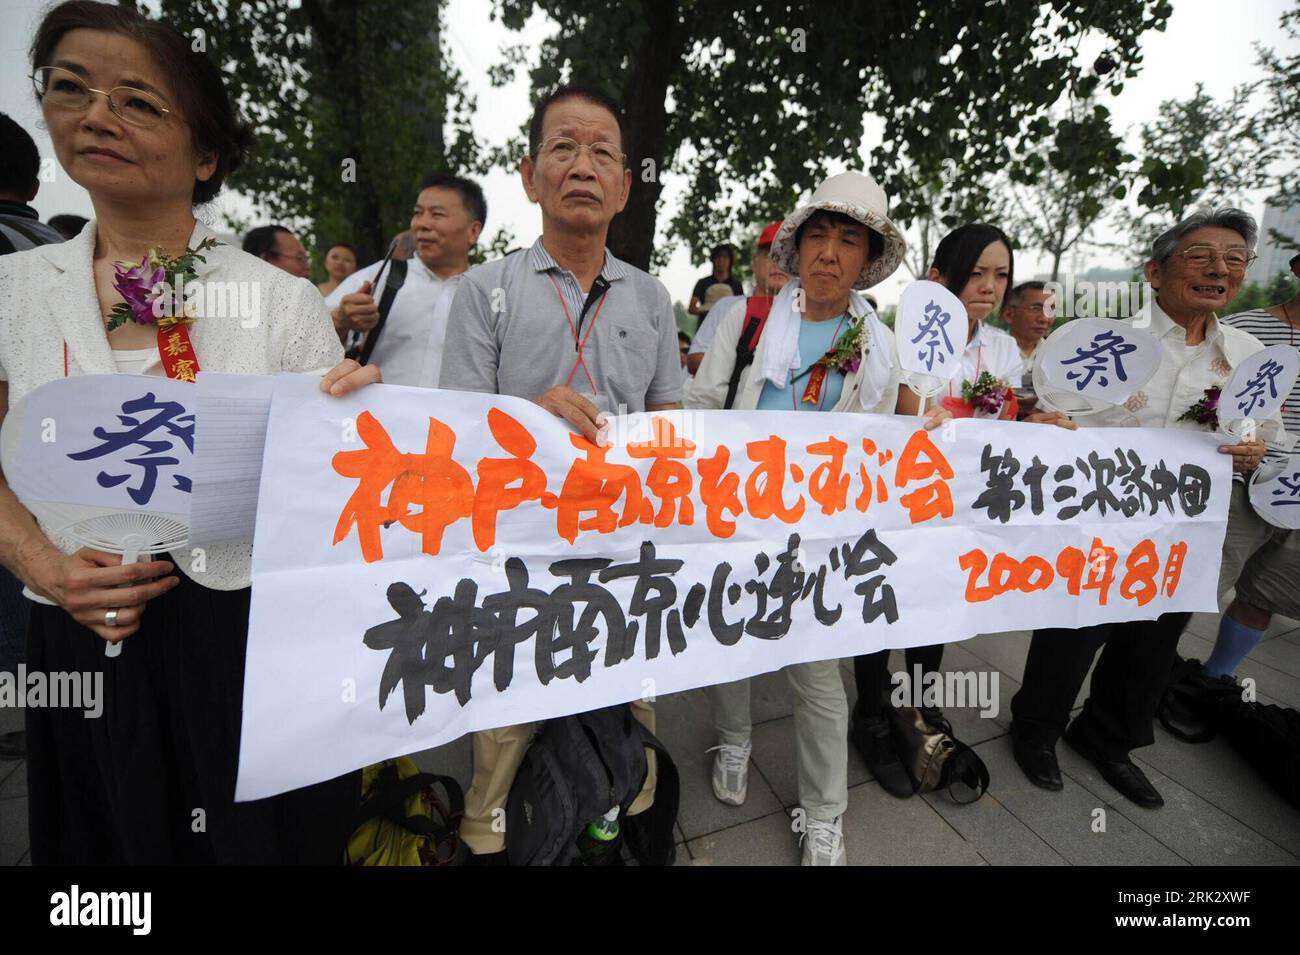 Bildnummer: 53265533  Datum: 15.08.2009  Copyright: imago/Xinhua (090815) -- NANJING, Aug. 15, 2009 (Xinhua) -- Japanese pacifists attend an assembly to commemorate the victims at the Memorial Hall of the Victims in Nanjing Massacre By Japanese Invaders in Nanjing, capital of east China s Jiangsu Province, Aug. 15, 2009. Chinese  and Japanese pacifists attended commemorating ceremonies on Aug. 15, the 64th anniversary of the victory day of the Chinese anti-Japanese war. (Xinhua/Han Yuqing) (msq) (3)CHINA-NANJING-NANJING MASSACRE-COMMEMORATION (CN)  PUBLICATIONxNOTxINxCHN  Ausstellung kbdig xcb Stock Photo